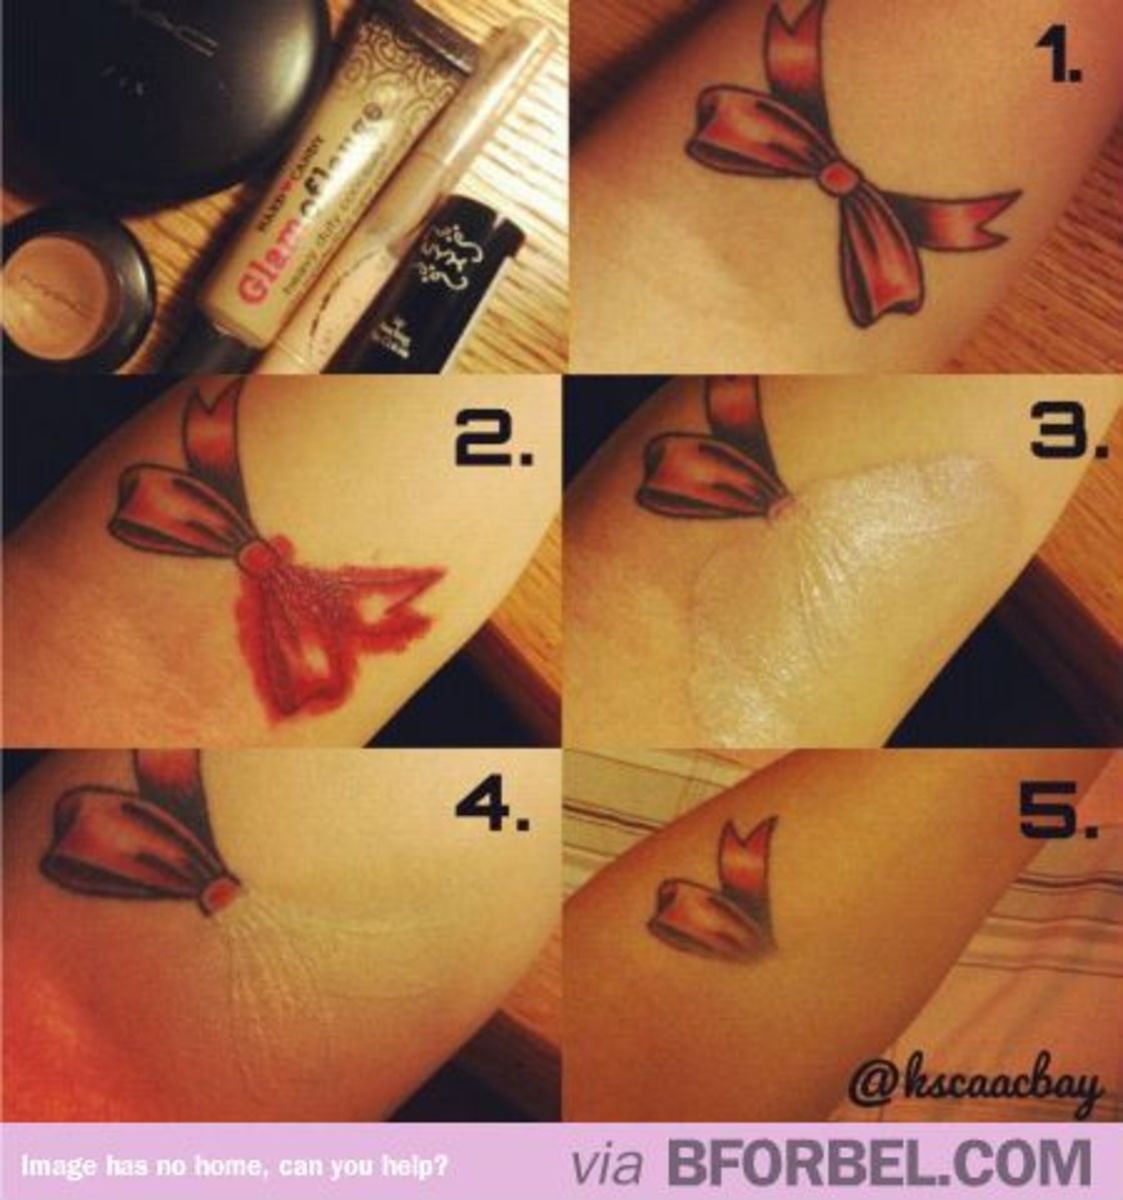 If you want to cover up your ink, go over it with red lipstick before going over it with foundation.